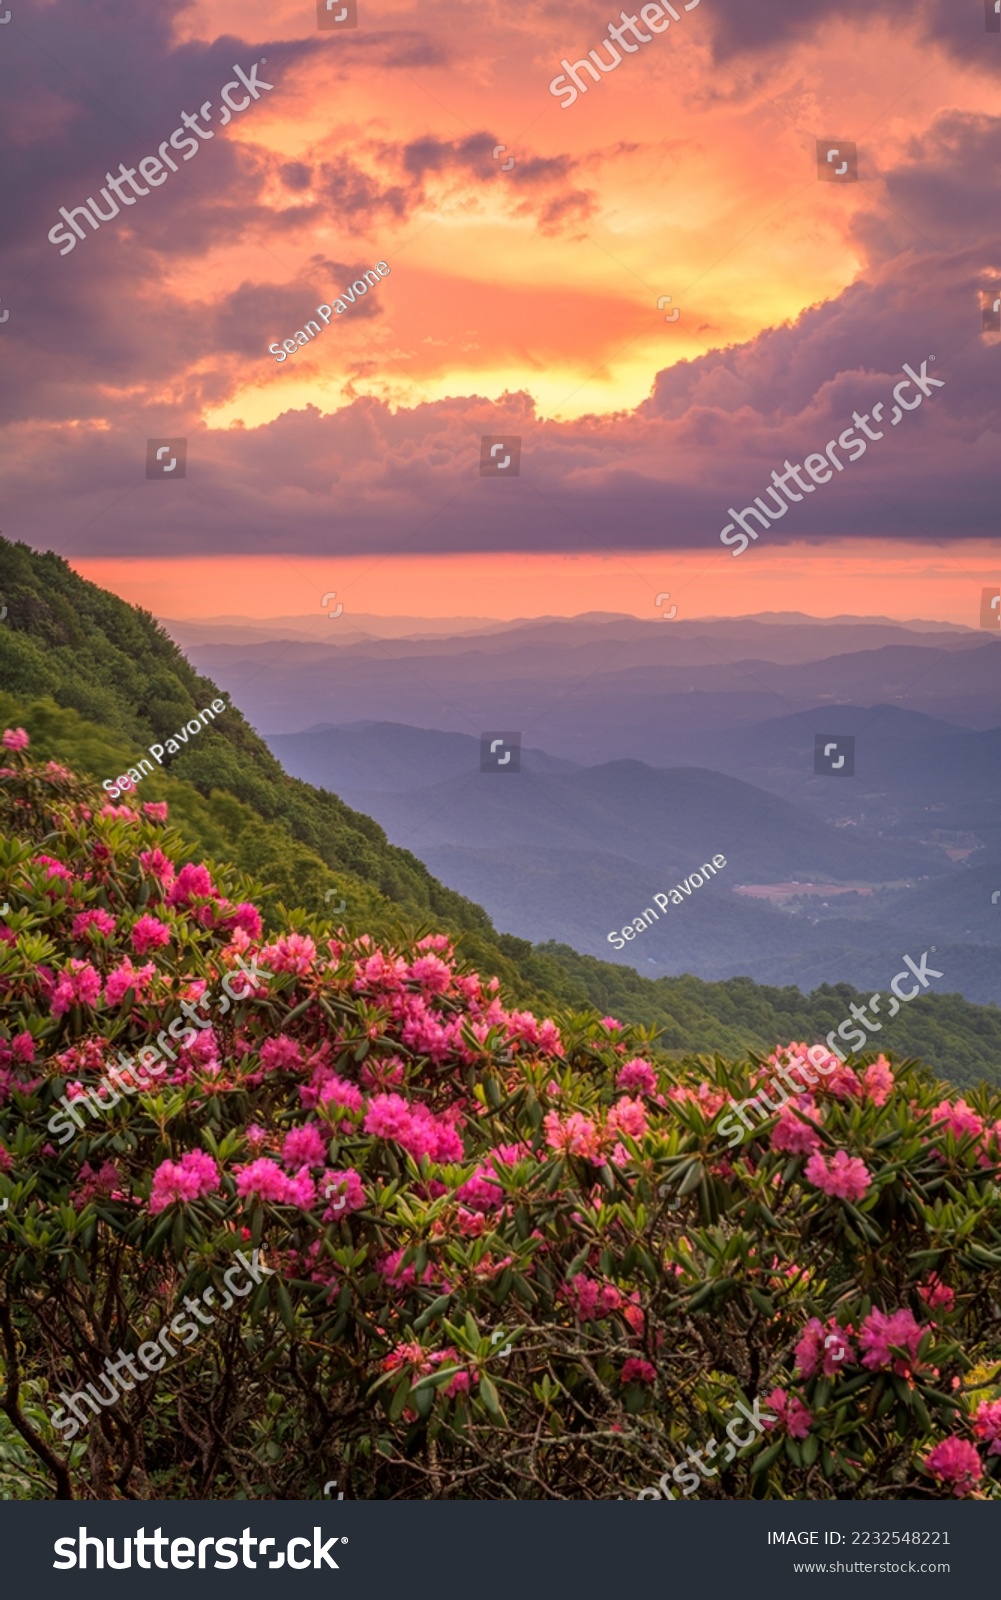 The Great Craggy Mountains along the Blue Ridge Parkway in North Carolina, USA with Catawba Rhododendron during a spring season sunset. #2232548221